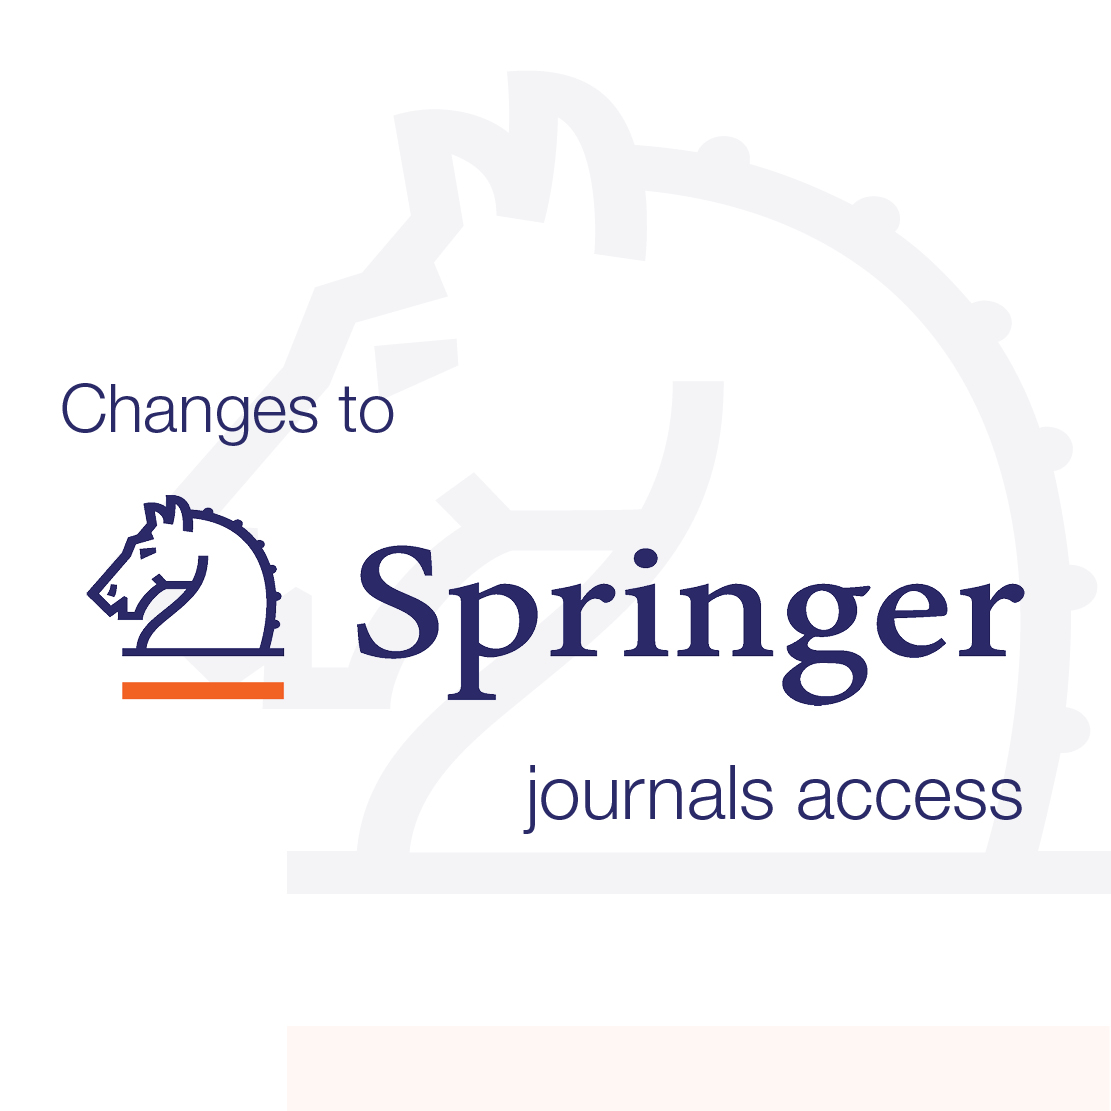 Text on the graphic reads Changes to Springer journals access. There is the Springer logo on the left side of the graphic and a faded, larger version of the same logo is in the background.